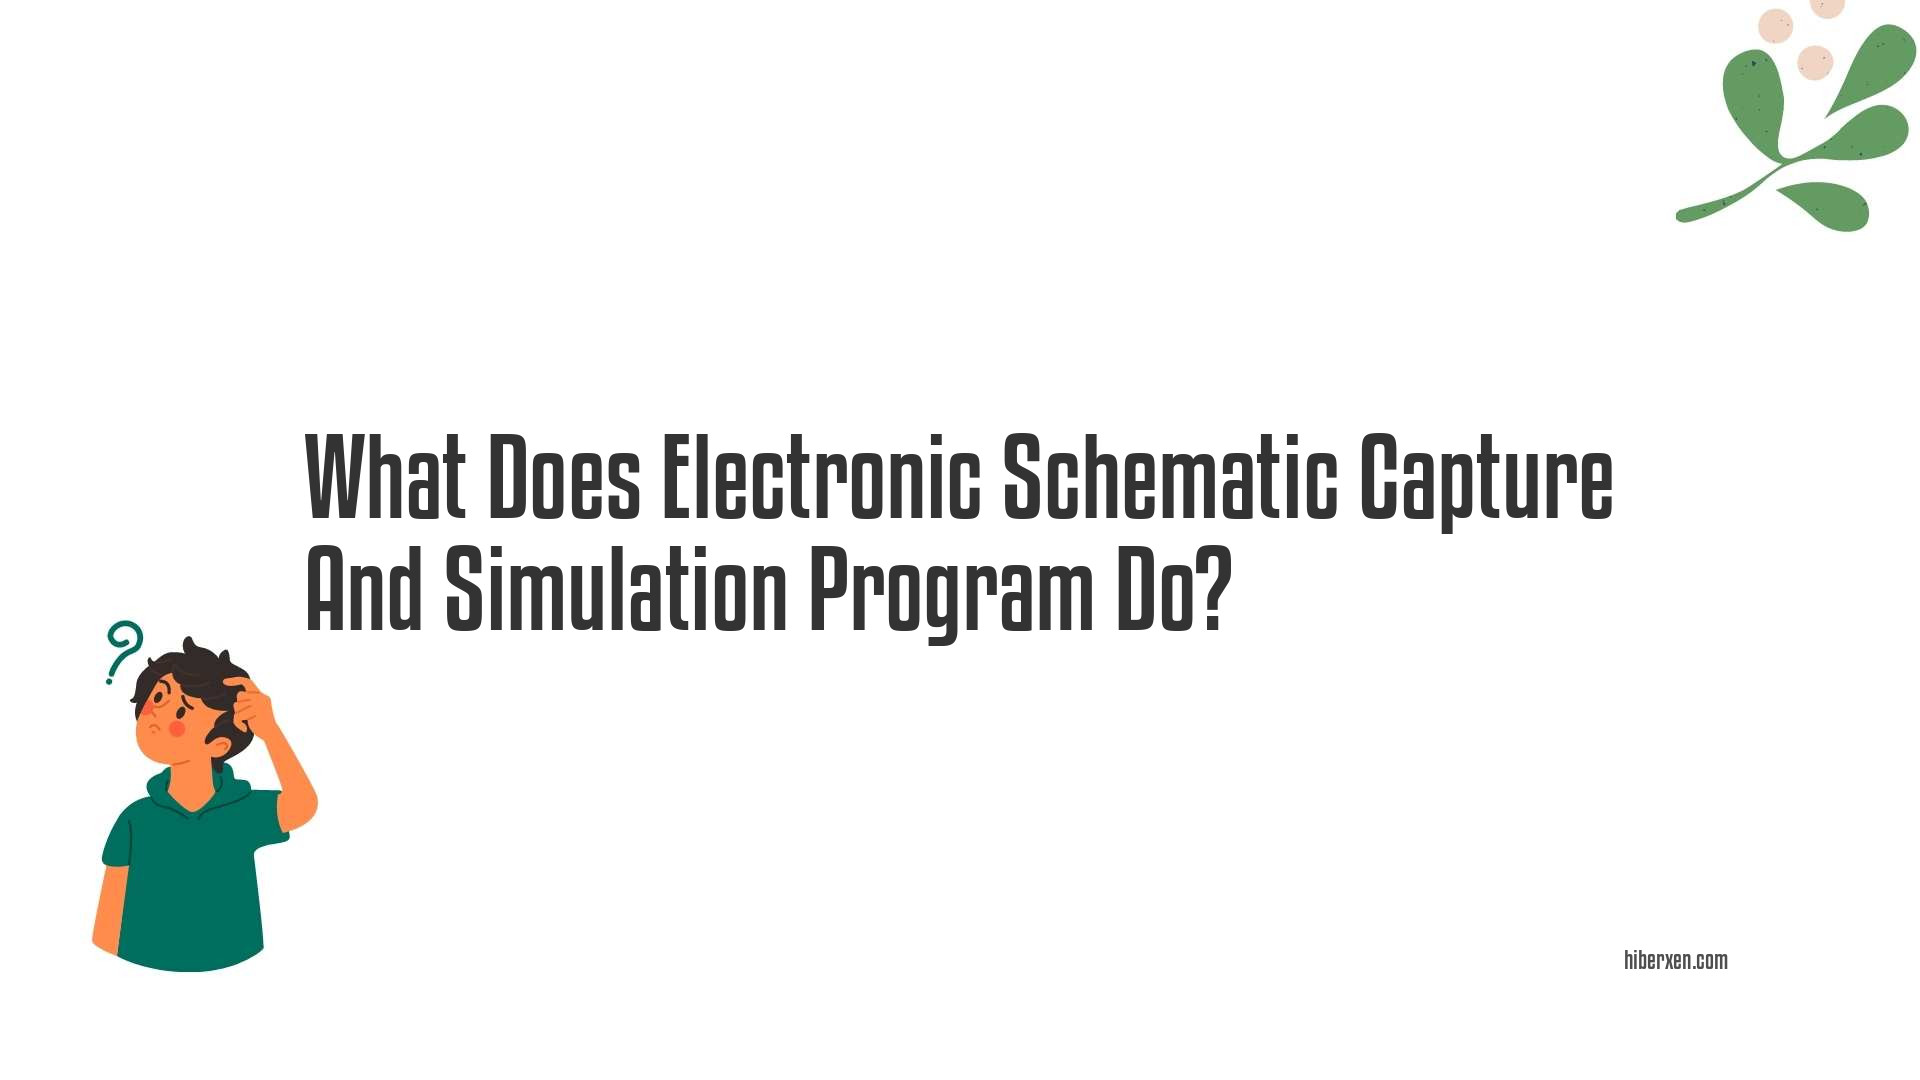 What Does Electronic Schematic Capture And Simulation Program Do?